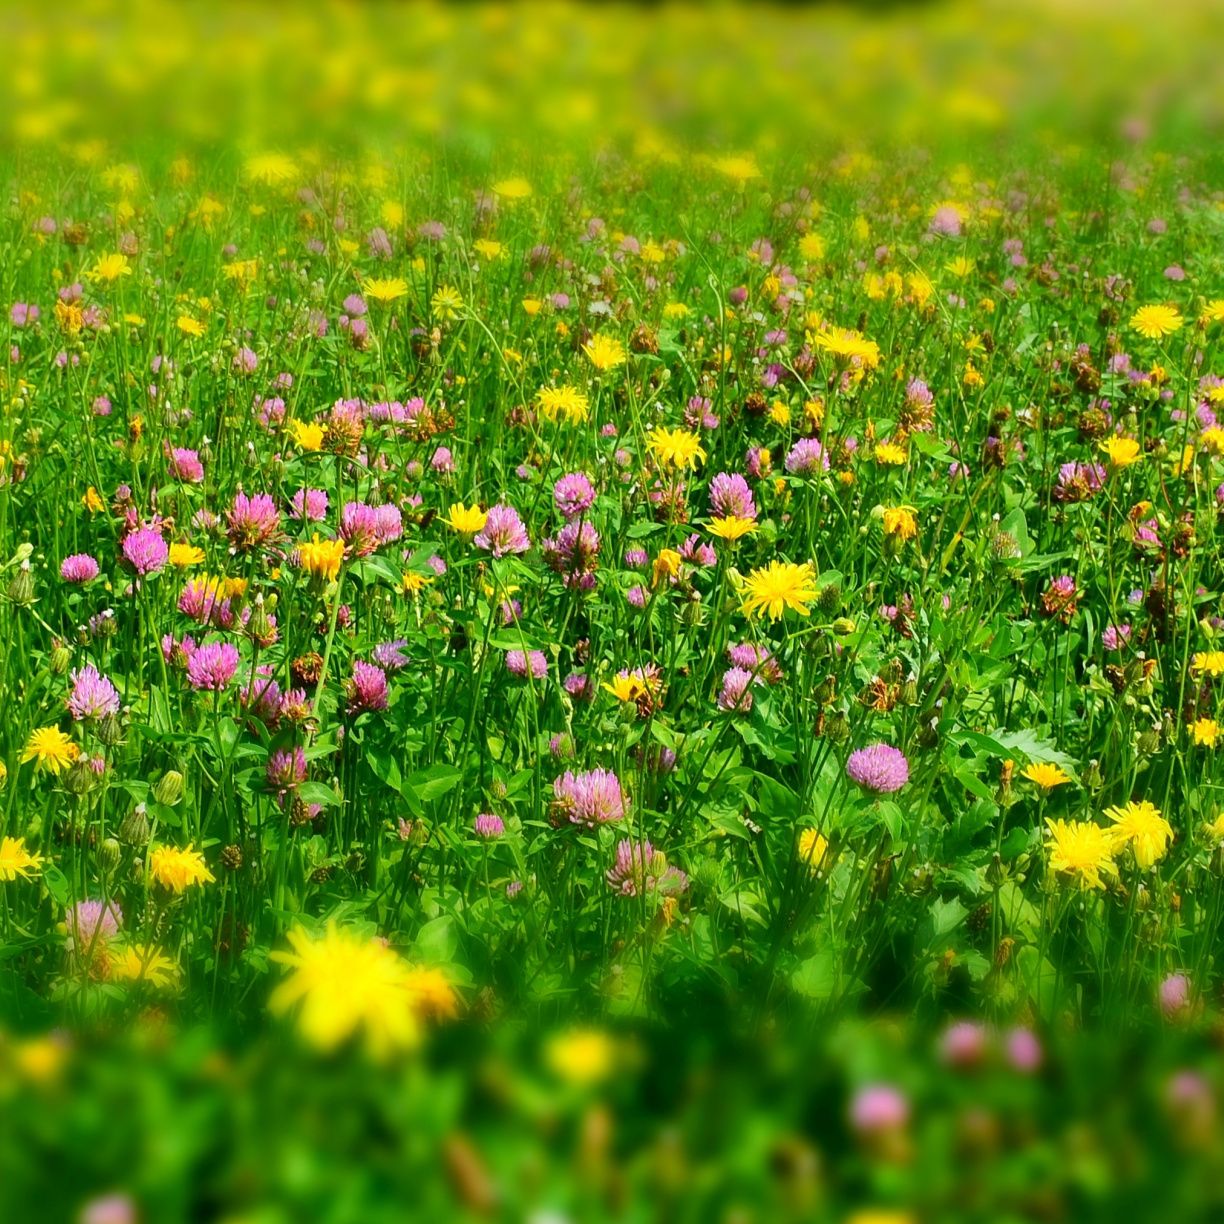 Meadow, plants, wild flowers, spring wallpaper, 4451x HD image, picture, ed6b06d5